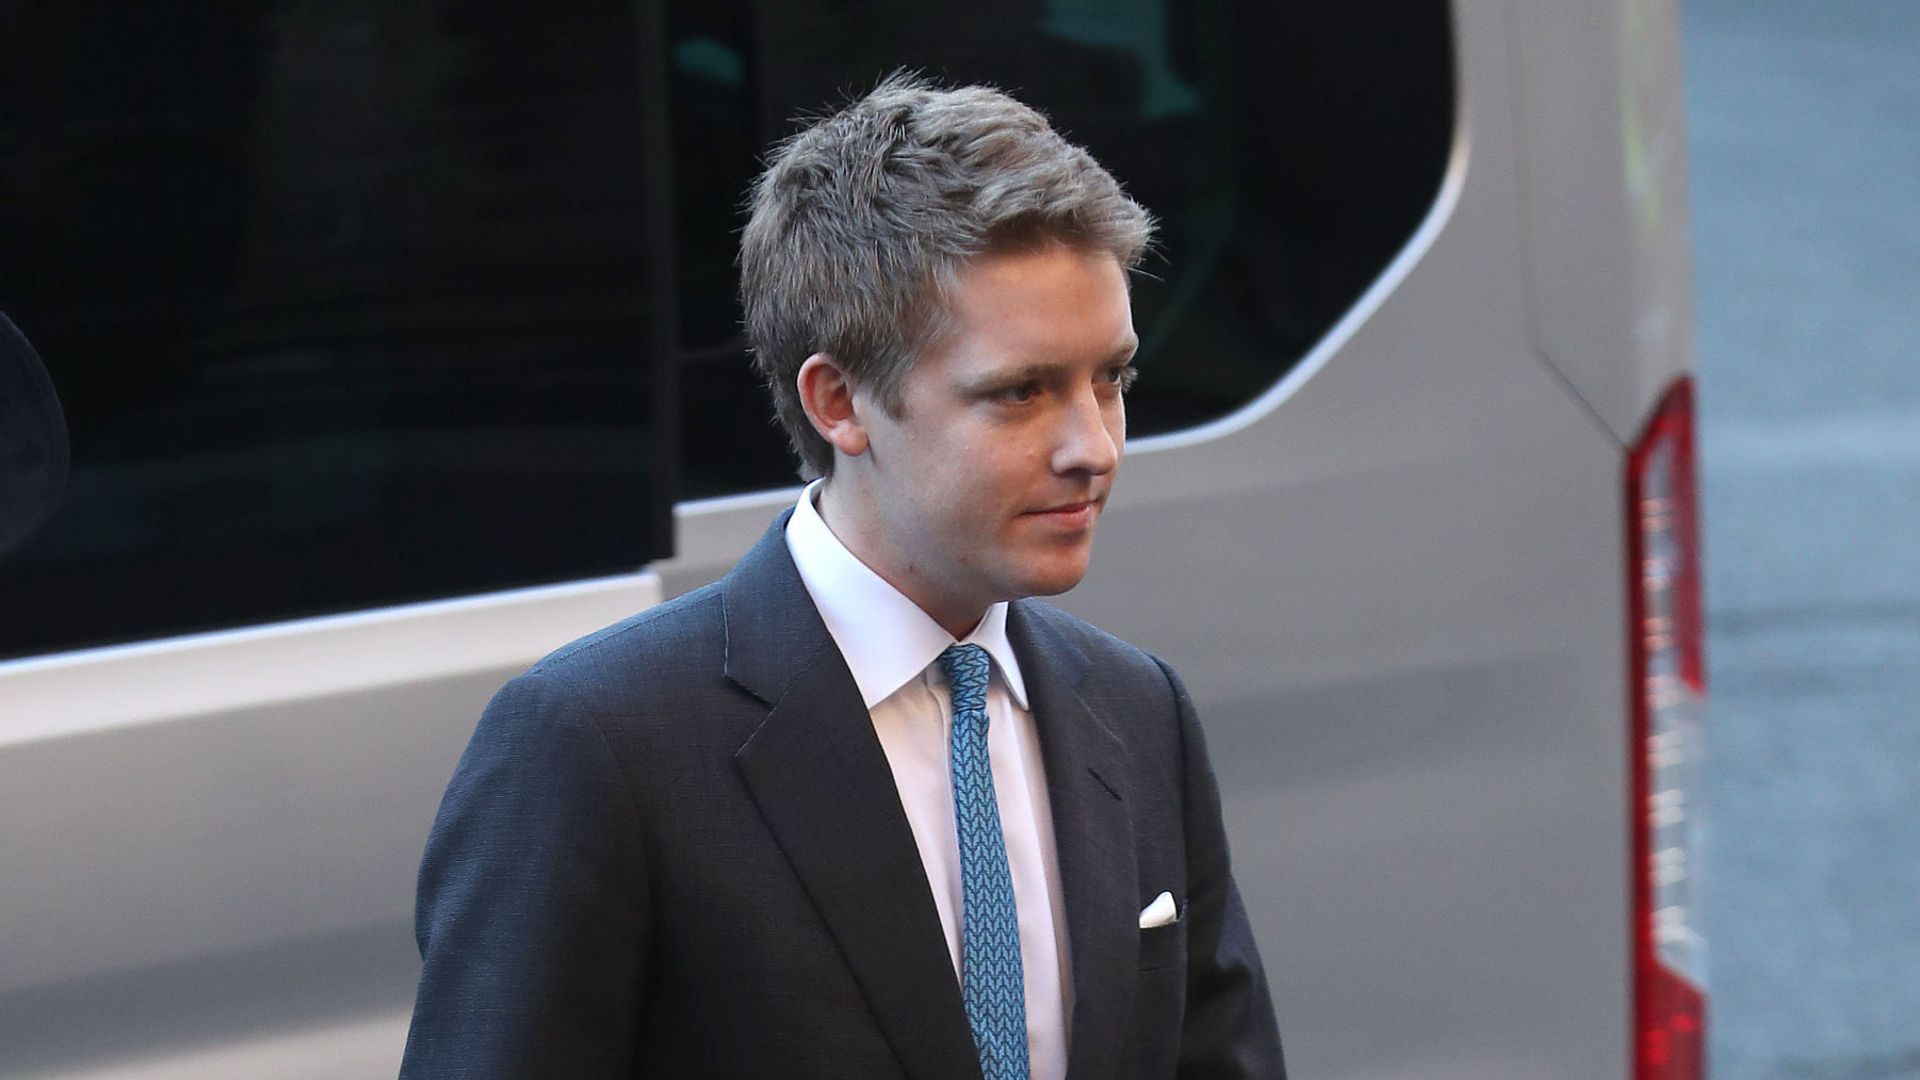 The Duke of Westminster tops Britain's richest people under 40